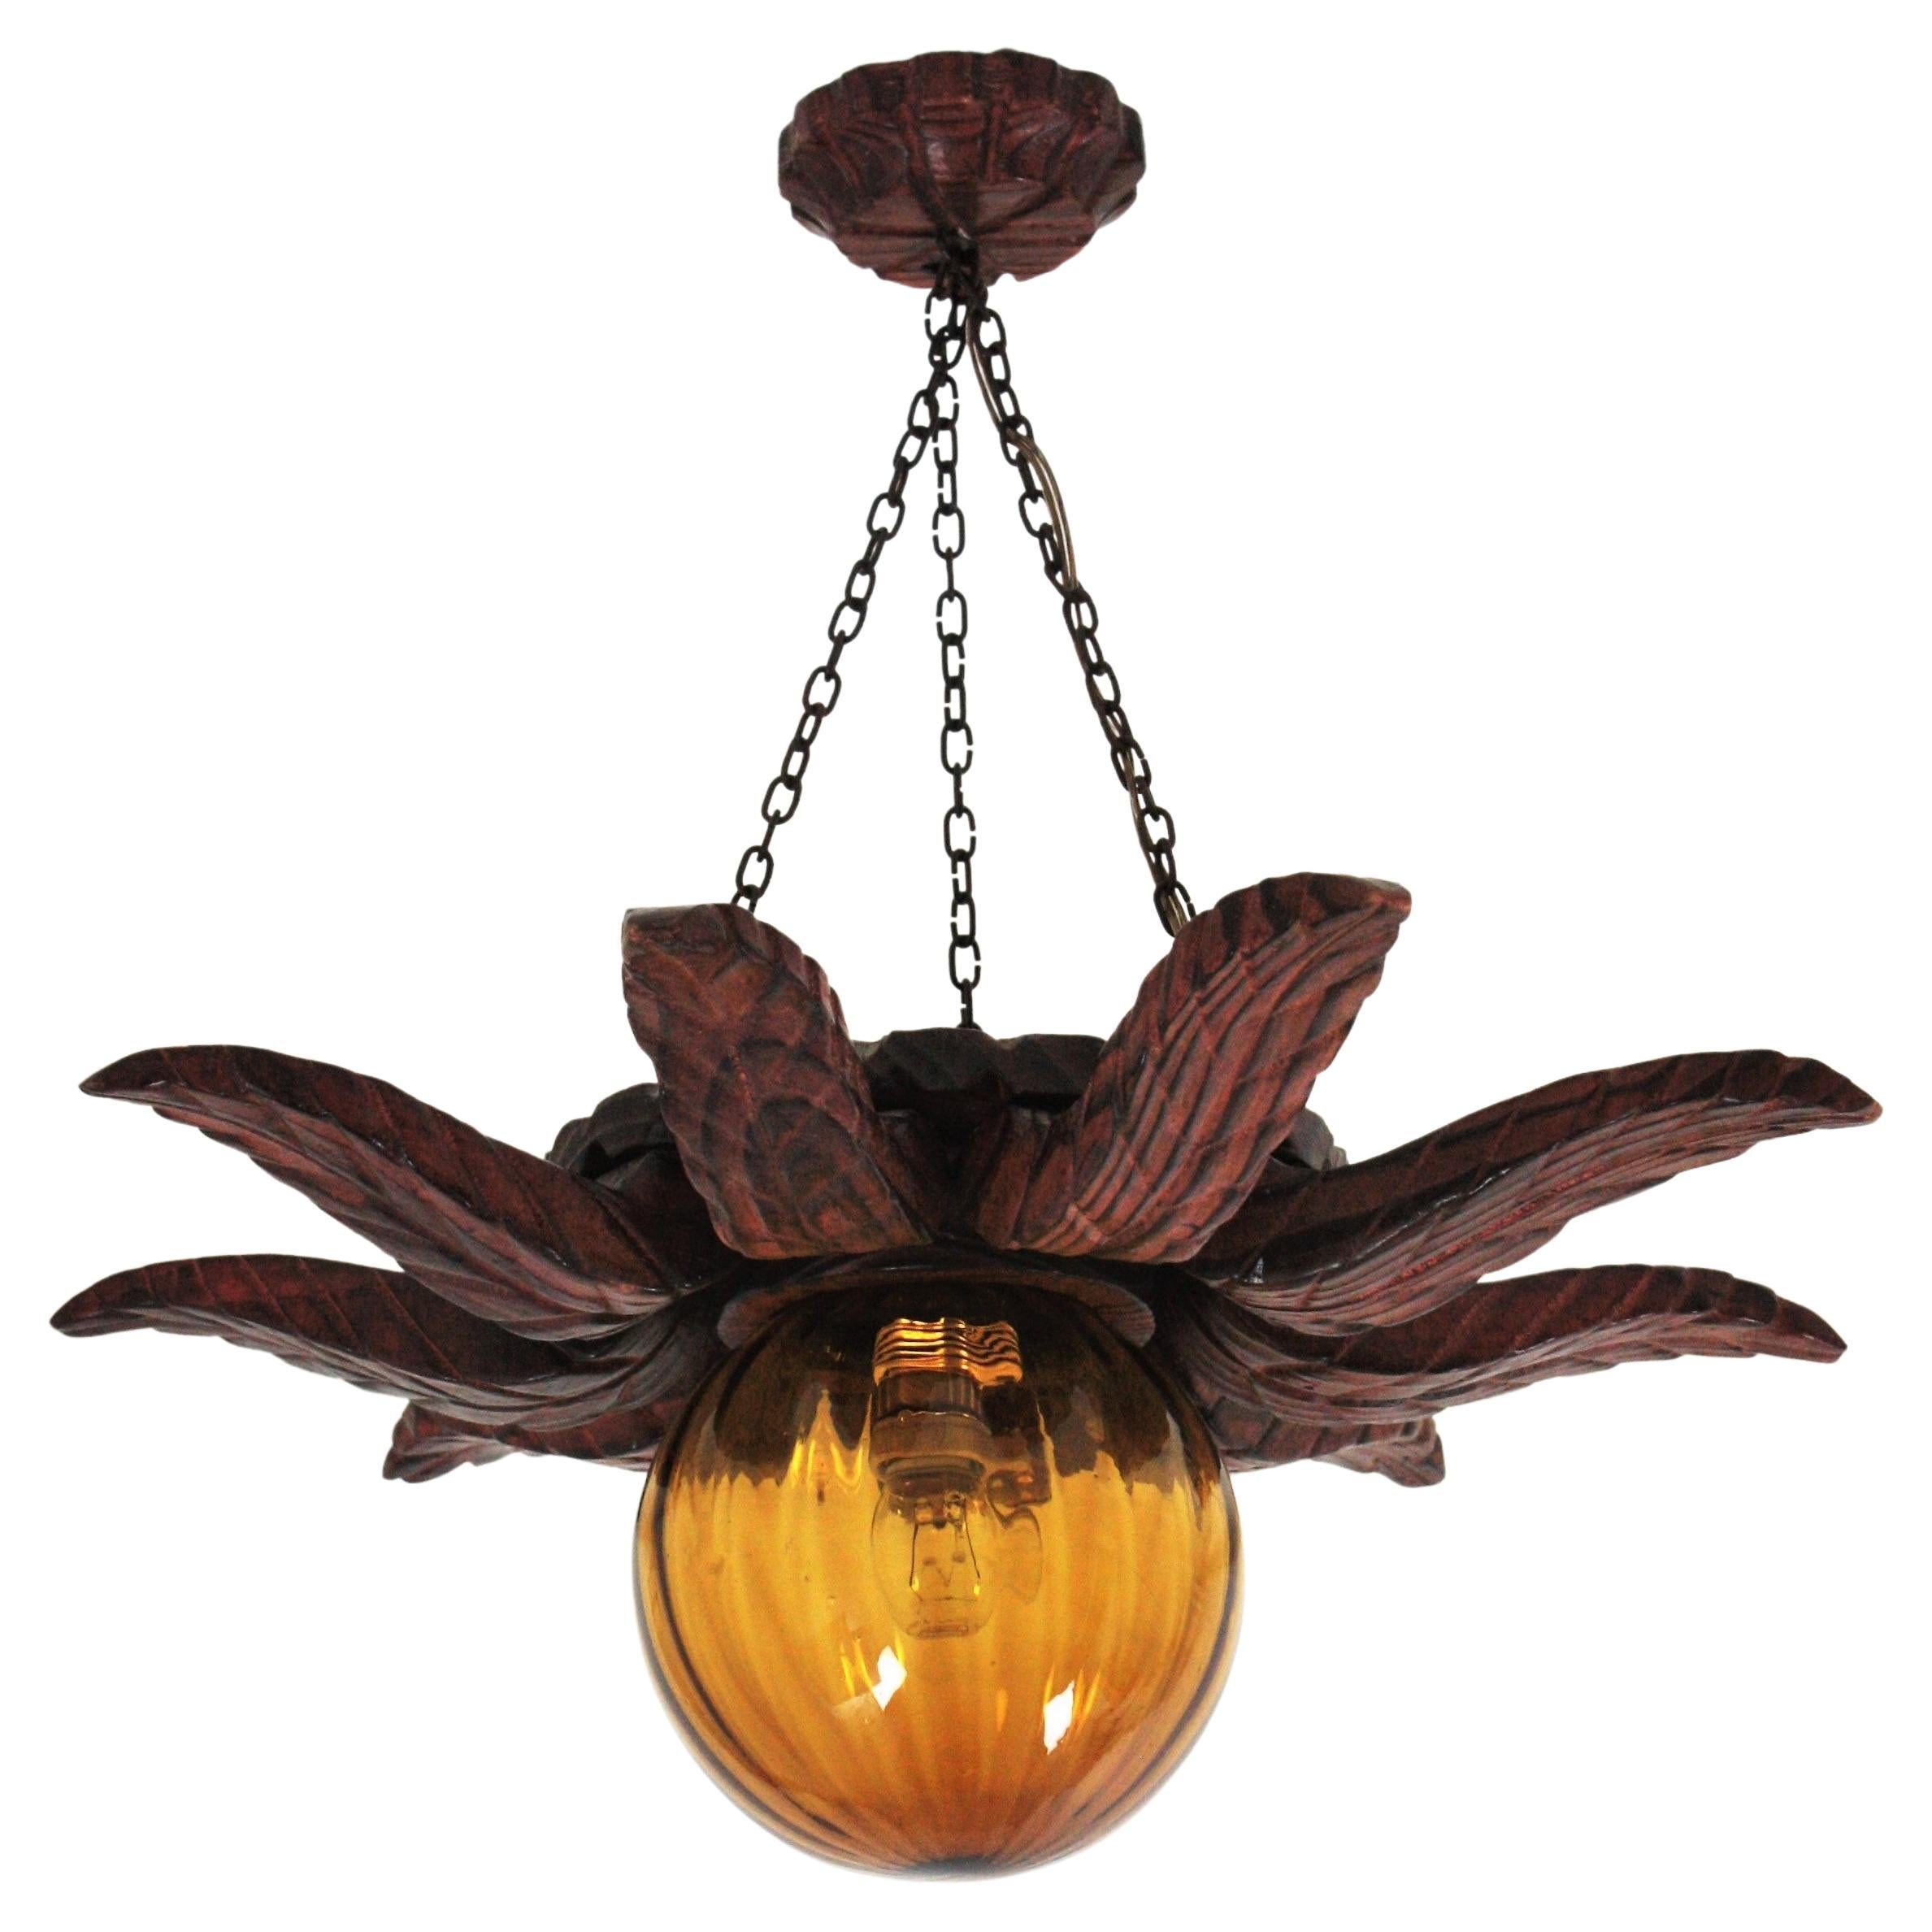 Spanish Colonial Sunburst Light Fixture in Carved Wood with Amber Glass Globe For Sale